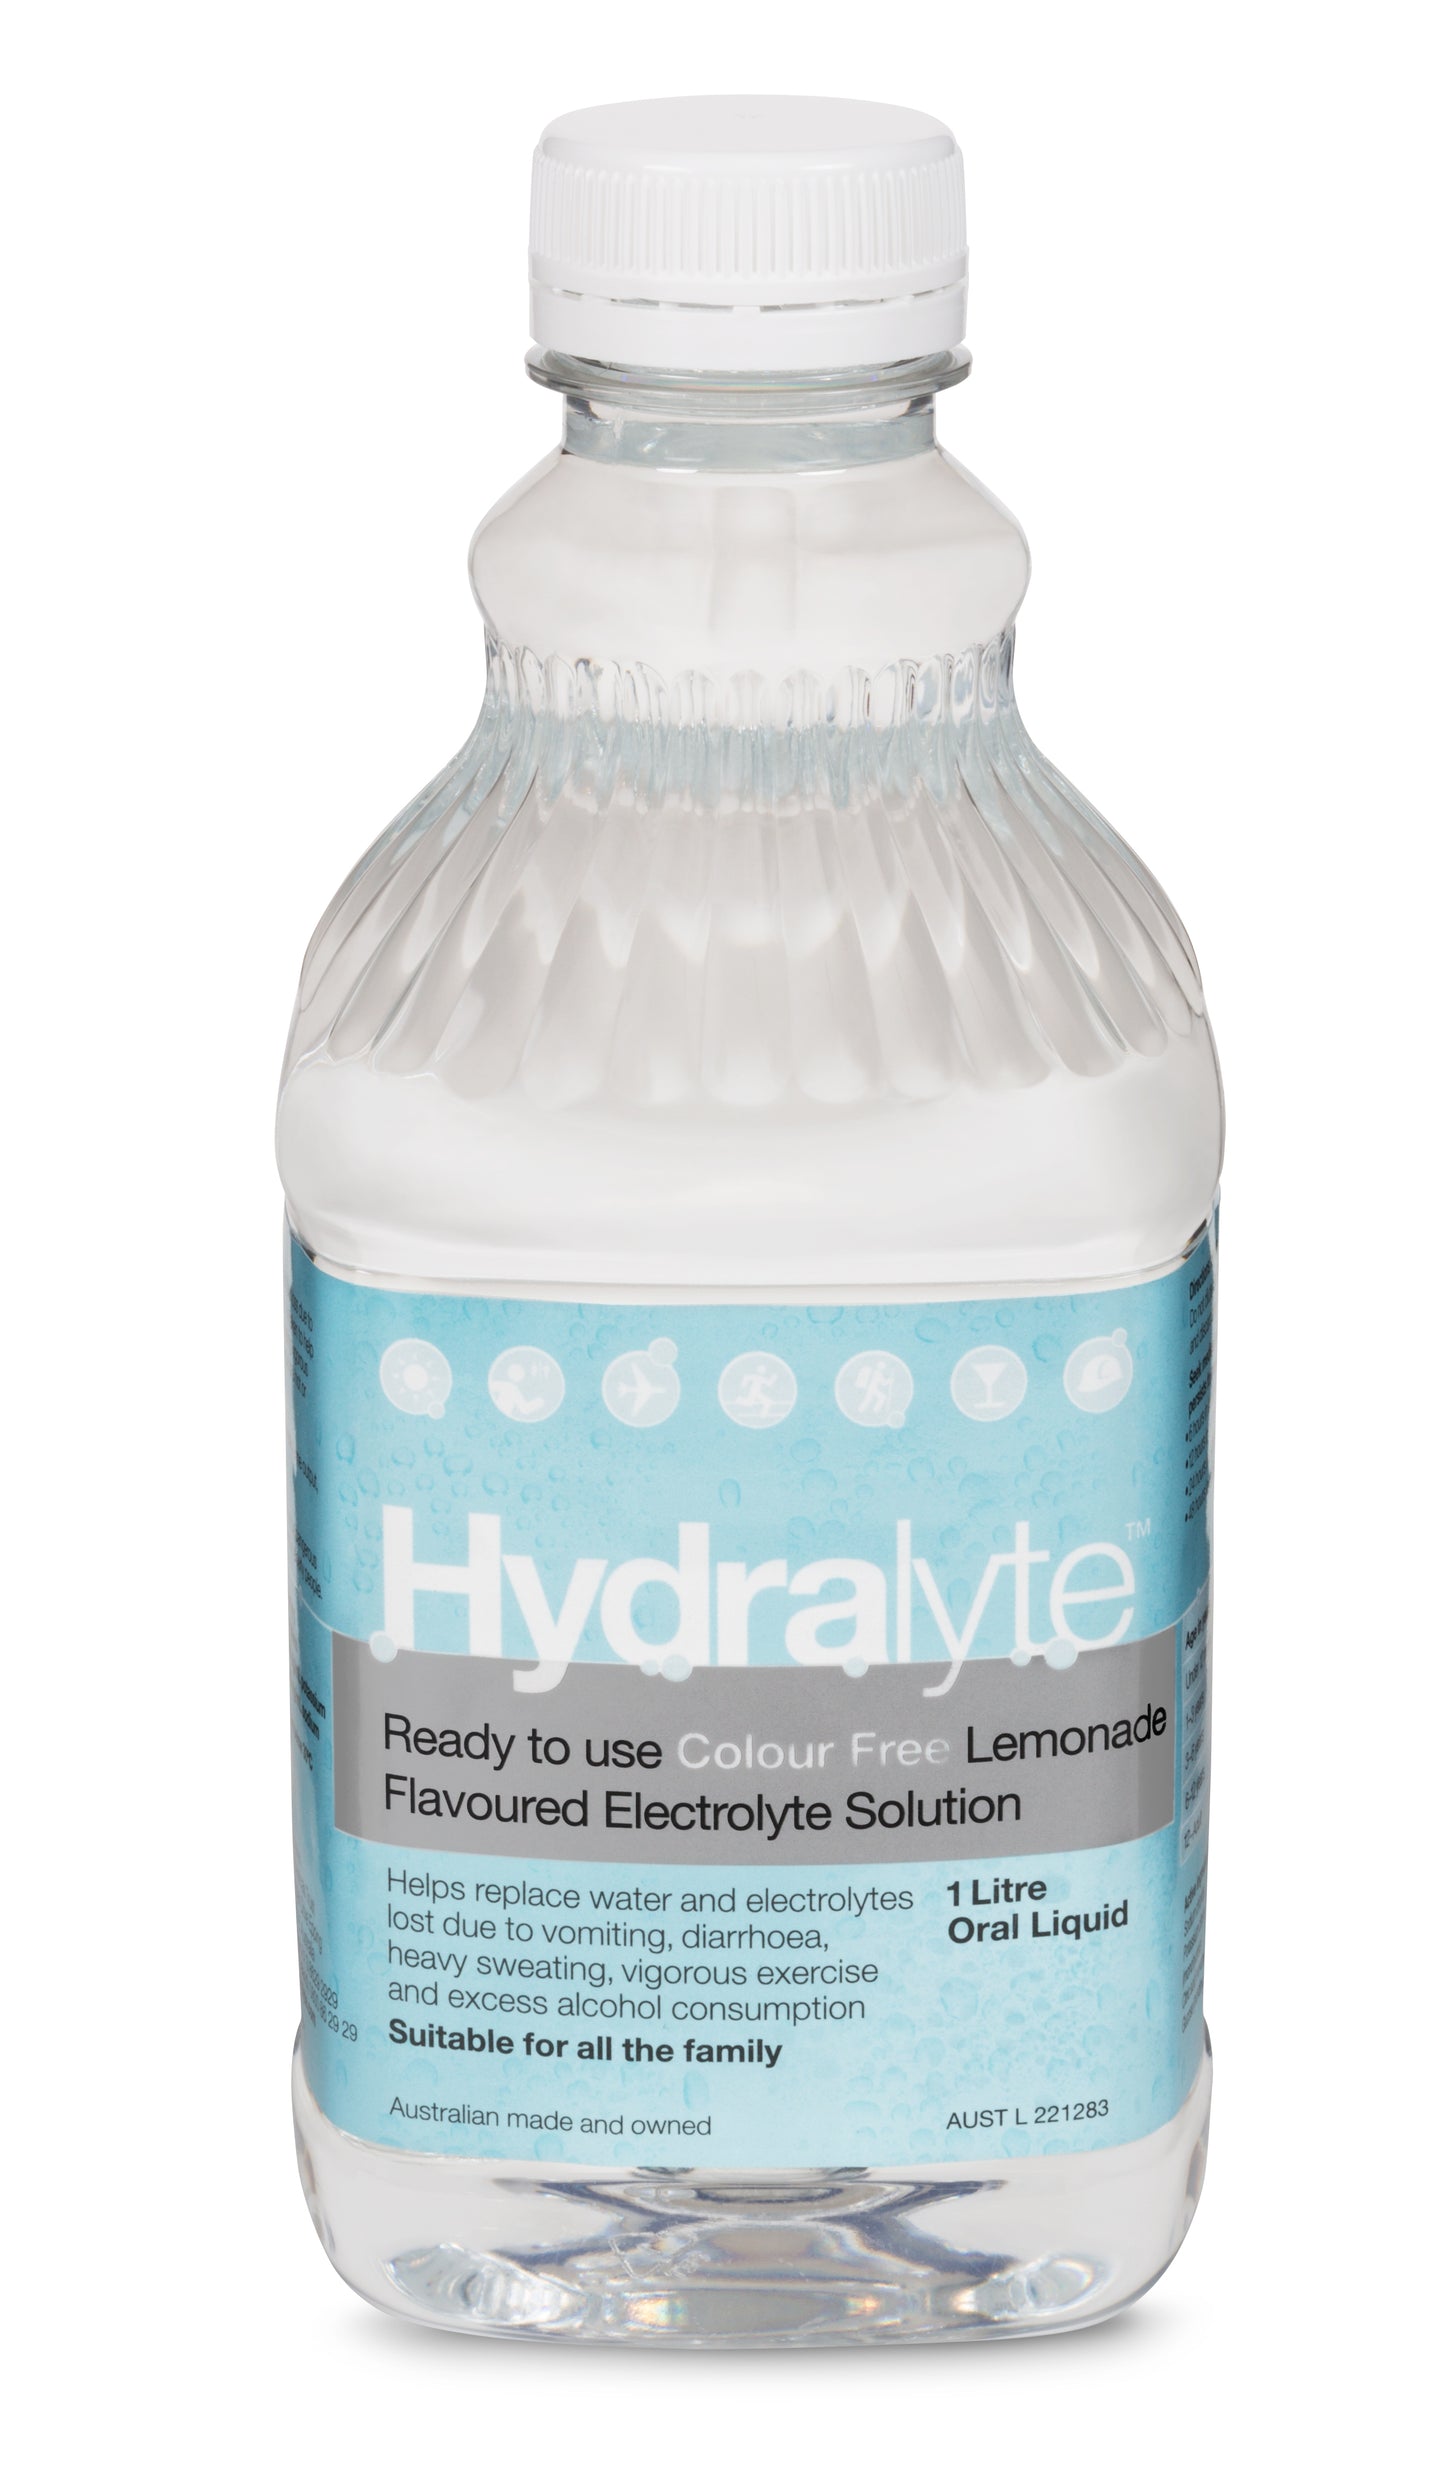 Hydralyte Ready to Drink colour free Lemonade Electrolyte Solution 1 litre